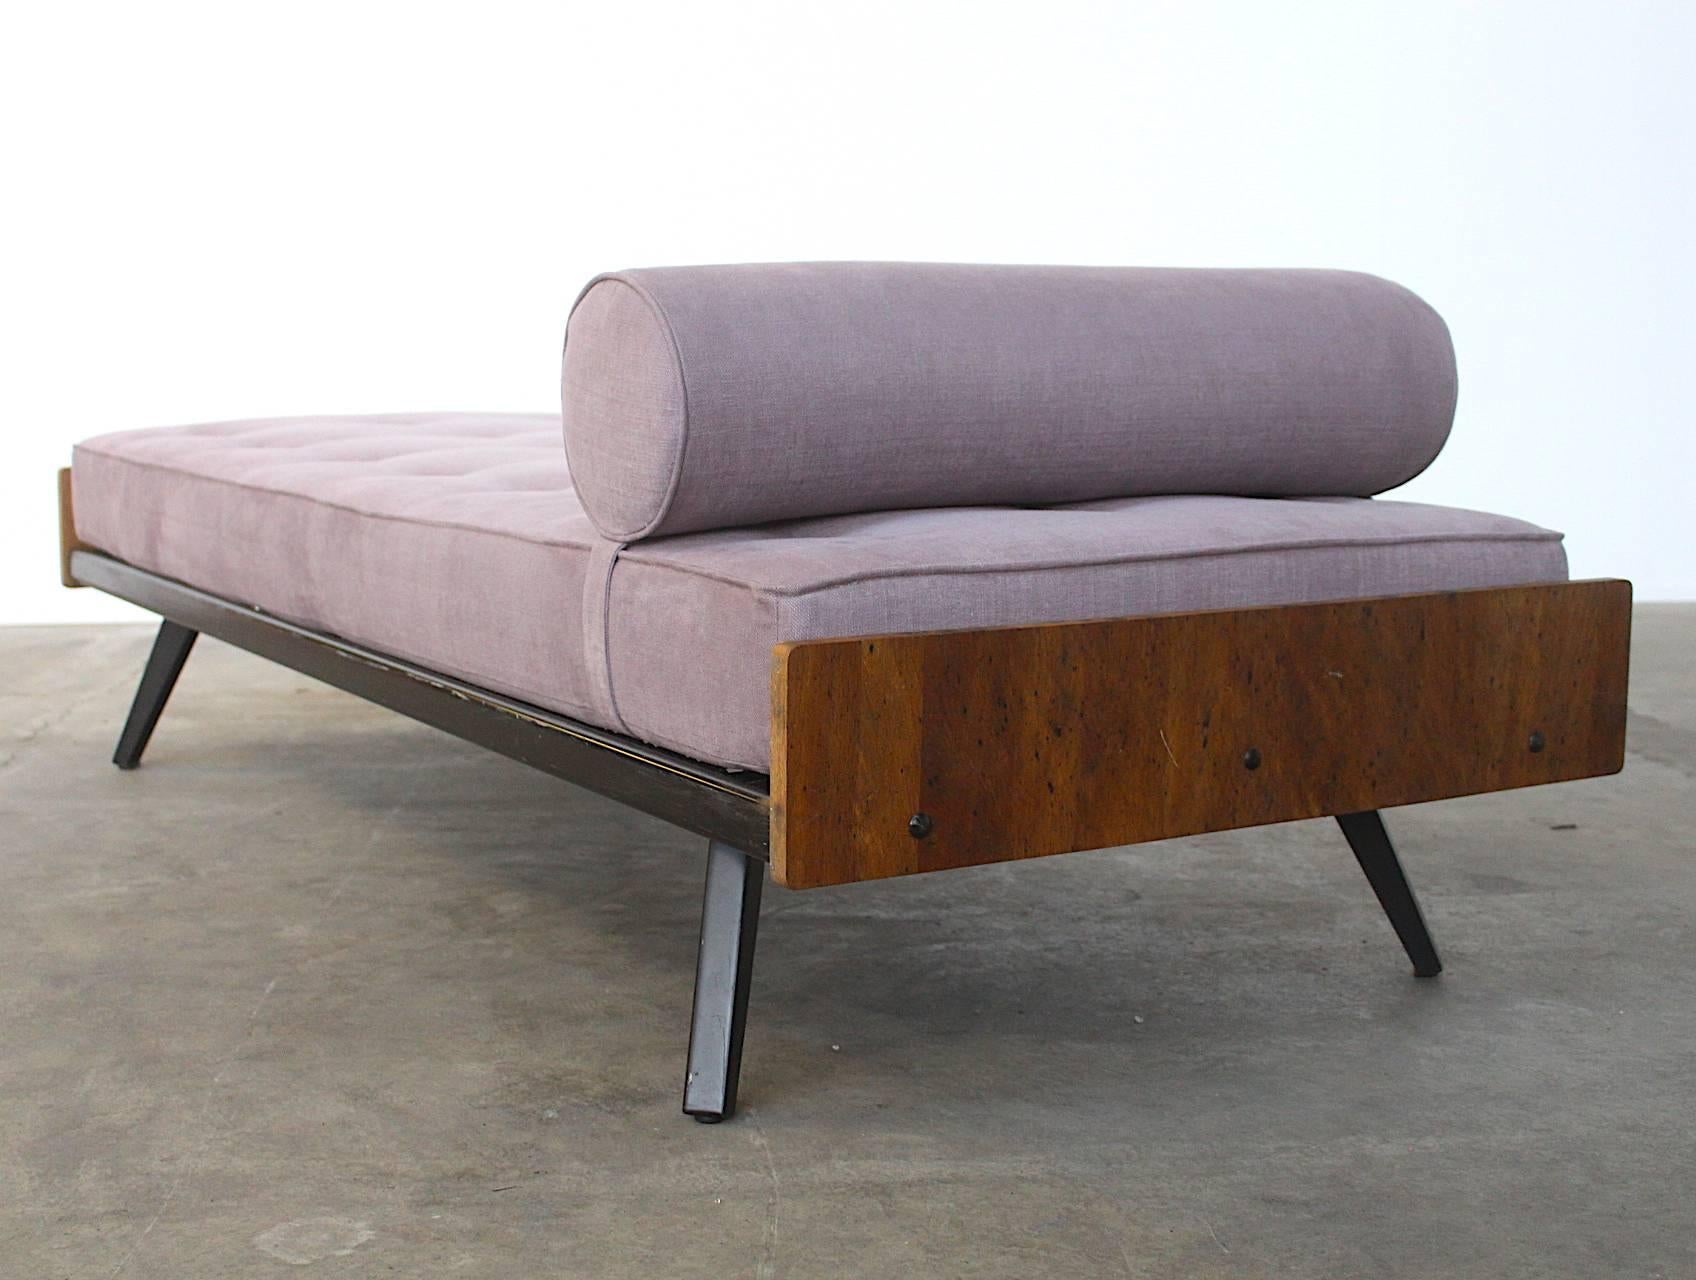 Mid-Century Modern French Jean Prouvé style Daybed, ca 1950